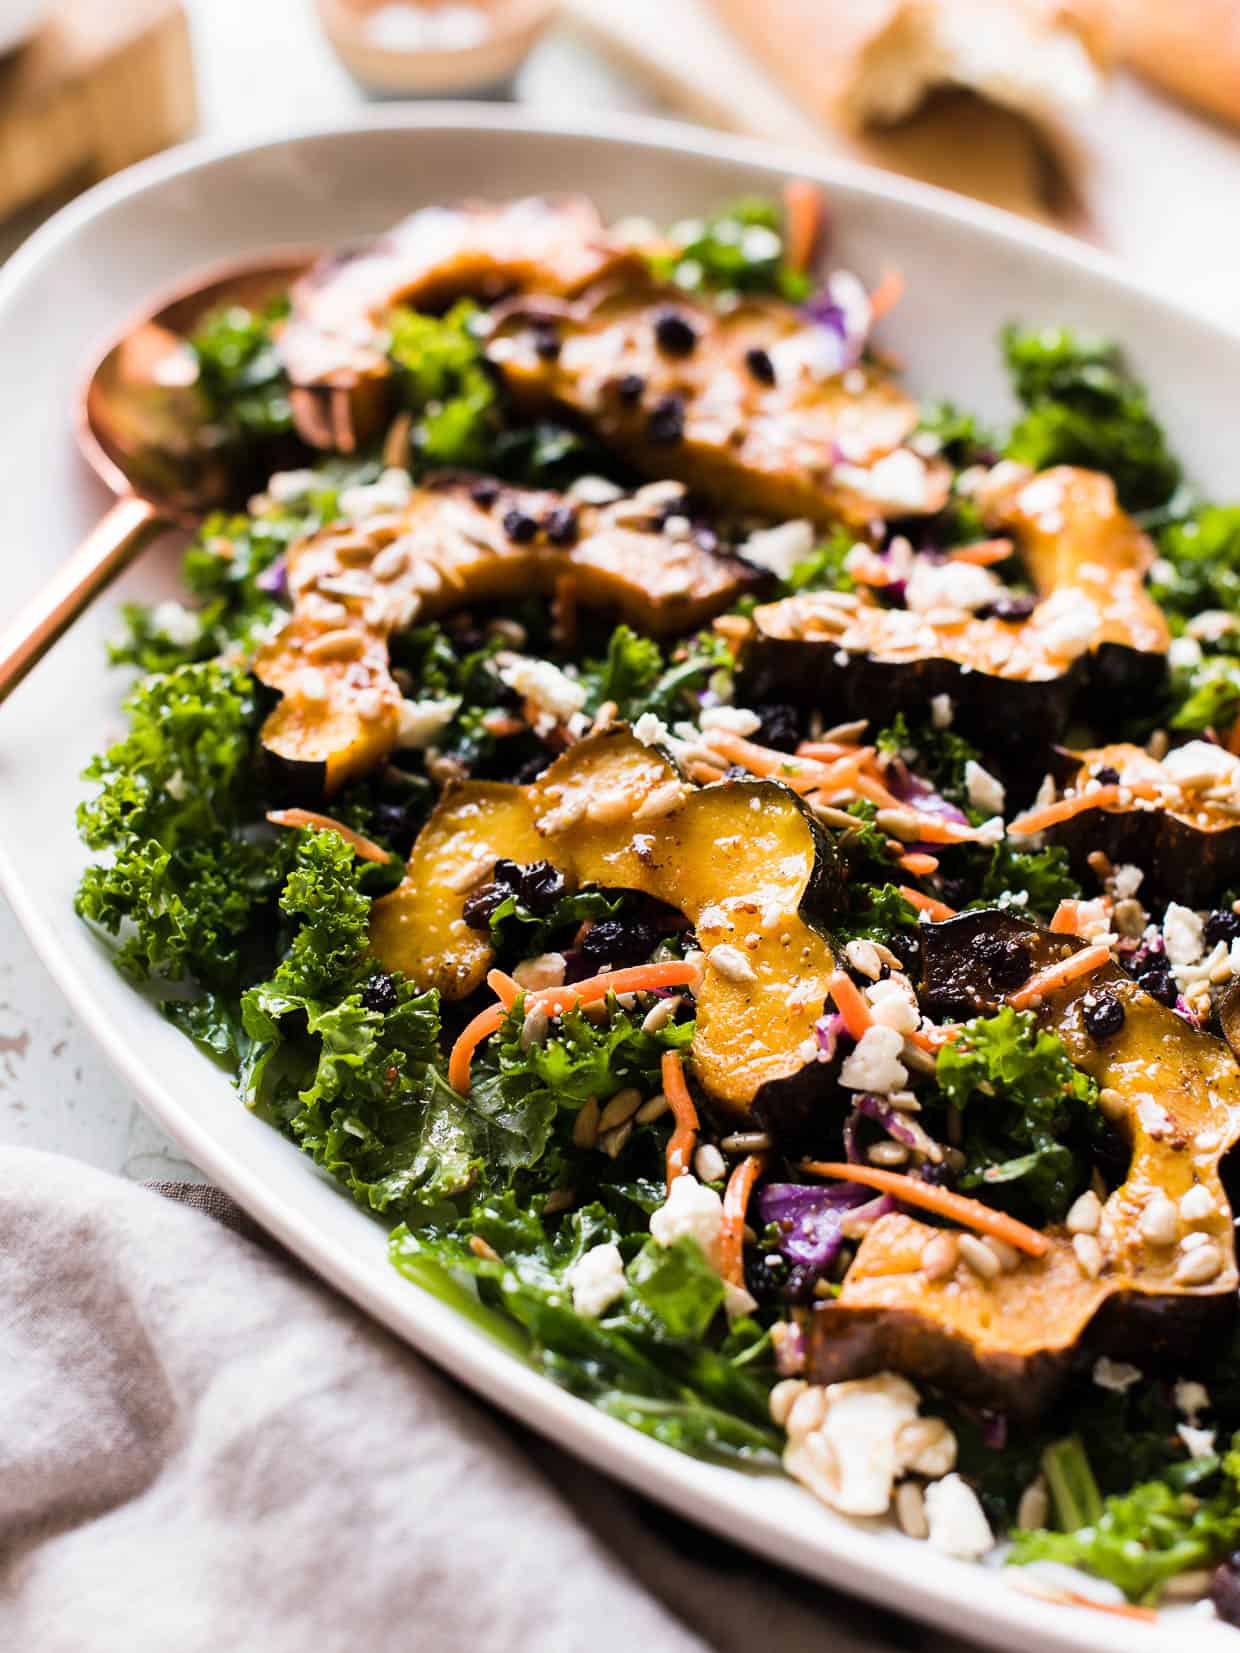 Roasted acorn squash over kale, with sunflower seeds, currants and a maple vinaigrette on a white serving platter.